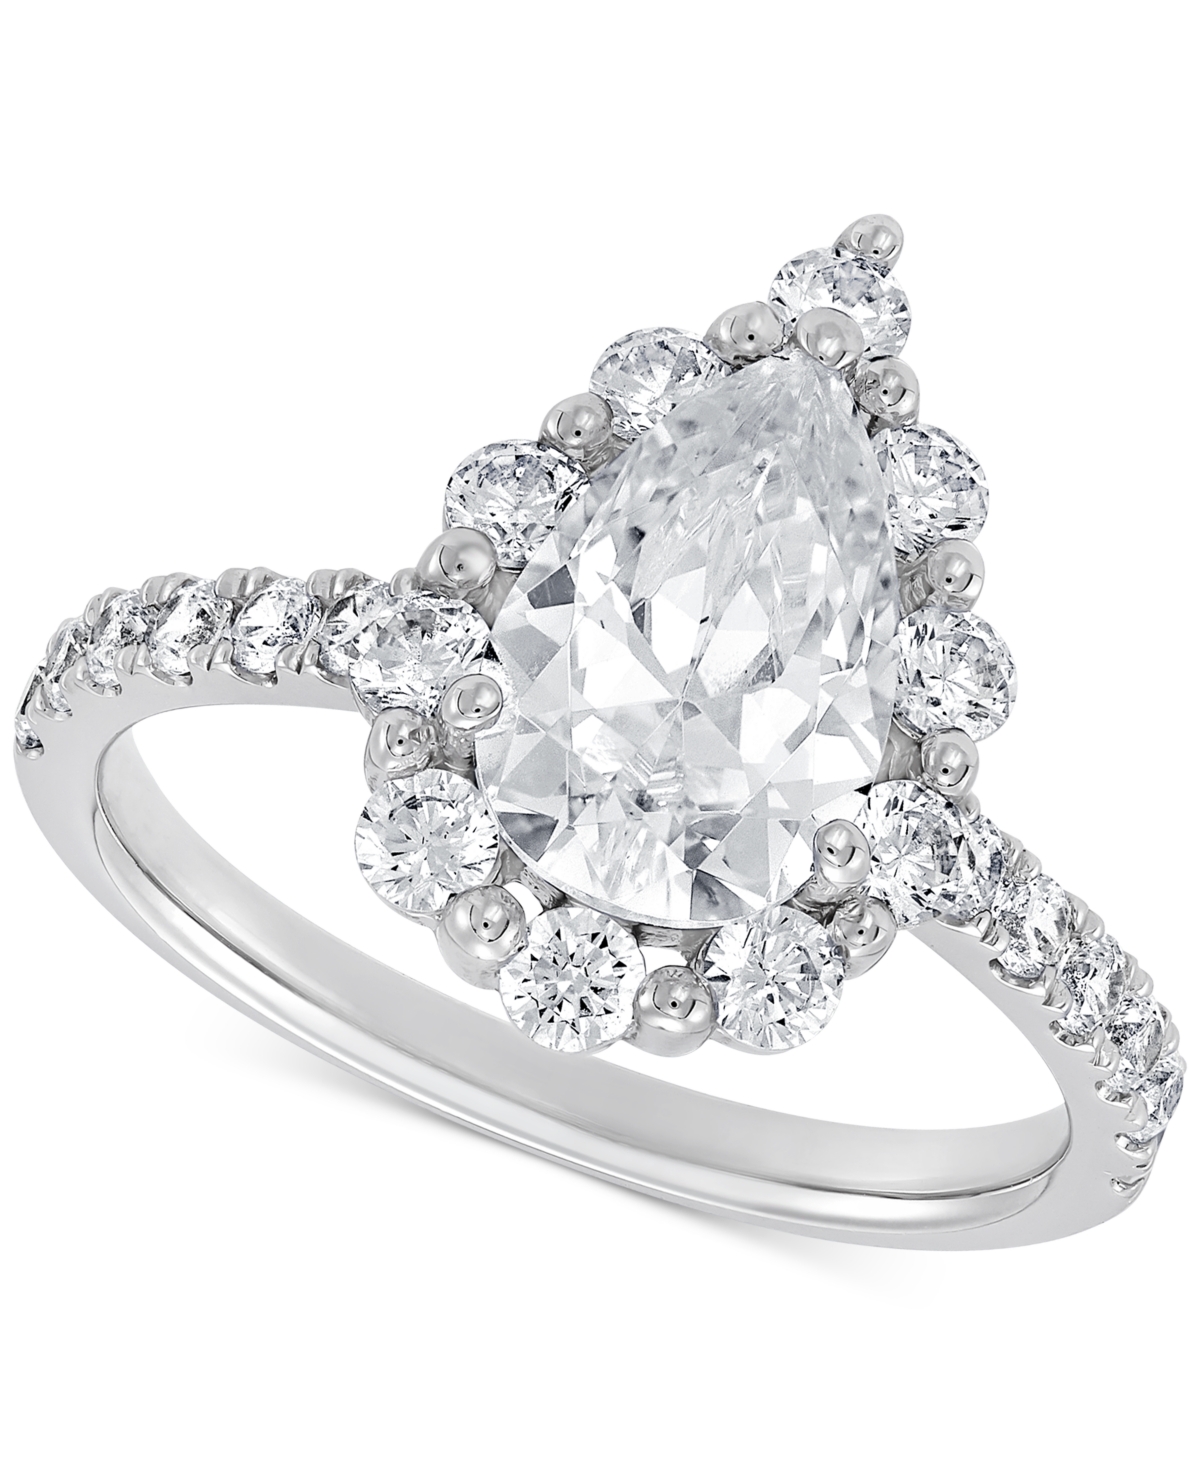 Igi Certified Lab Grown Diamond Pear-Cut Halo Engagement Ring (3 ct. t.w.) in 14k White Gold - White Gold